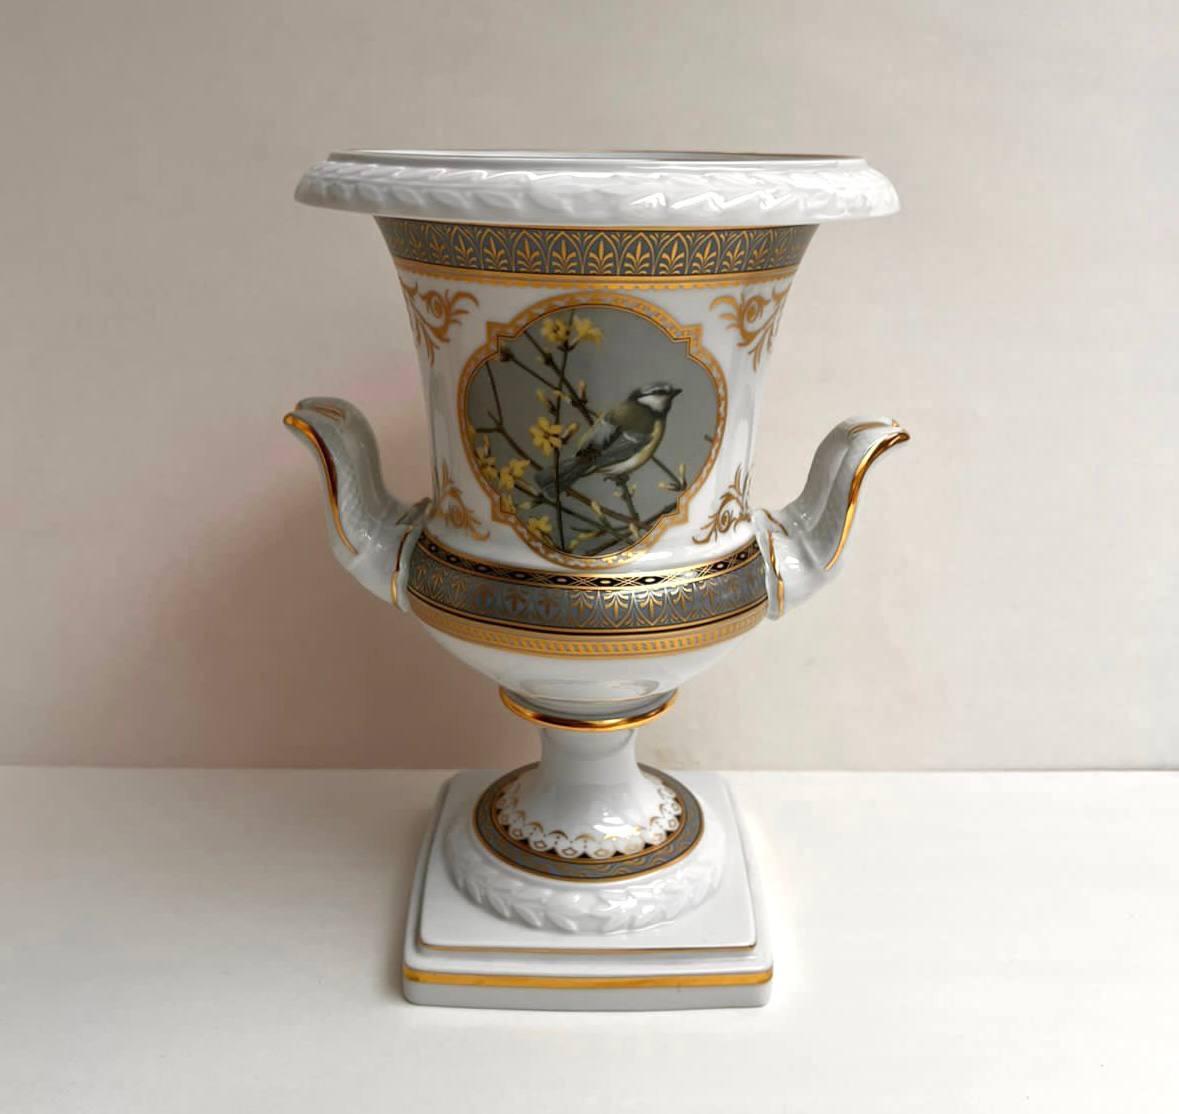 Attractive vintage vase with handles by Kaiser, Pavillon, Germany.

Baluster-shaped vase made of white high quality porcelain with gilding and green color, decorated with a painting depicting a bird on a branch.

Marked under the vase: Kaiser